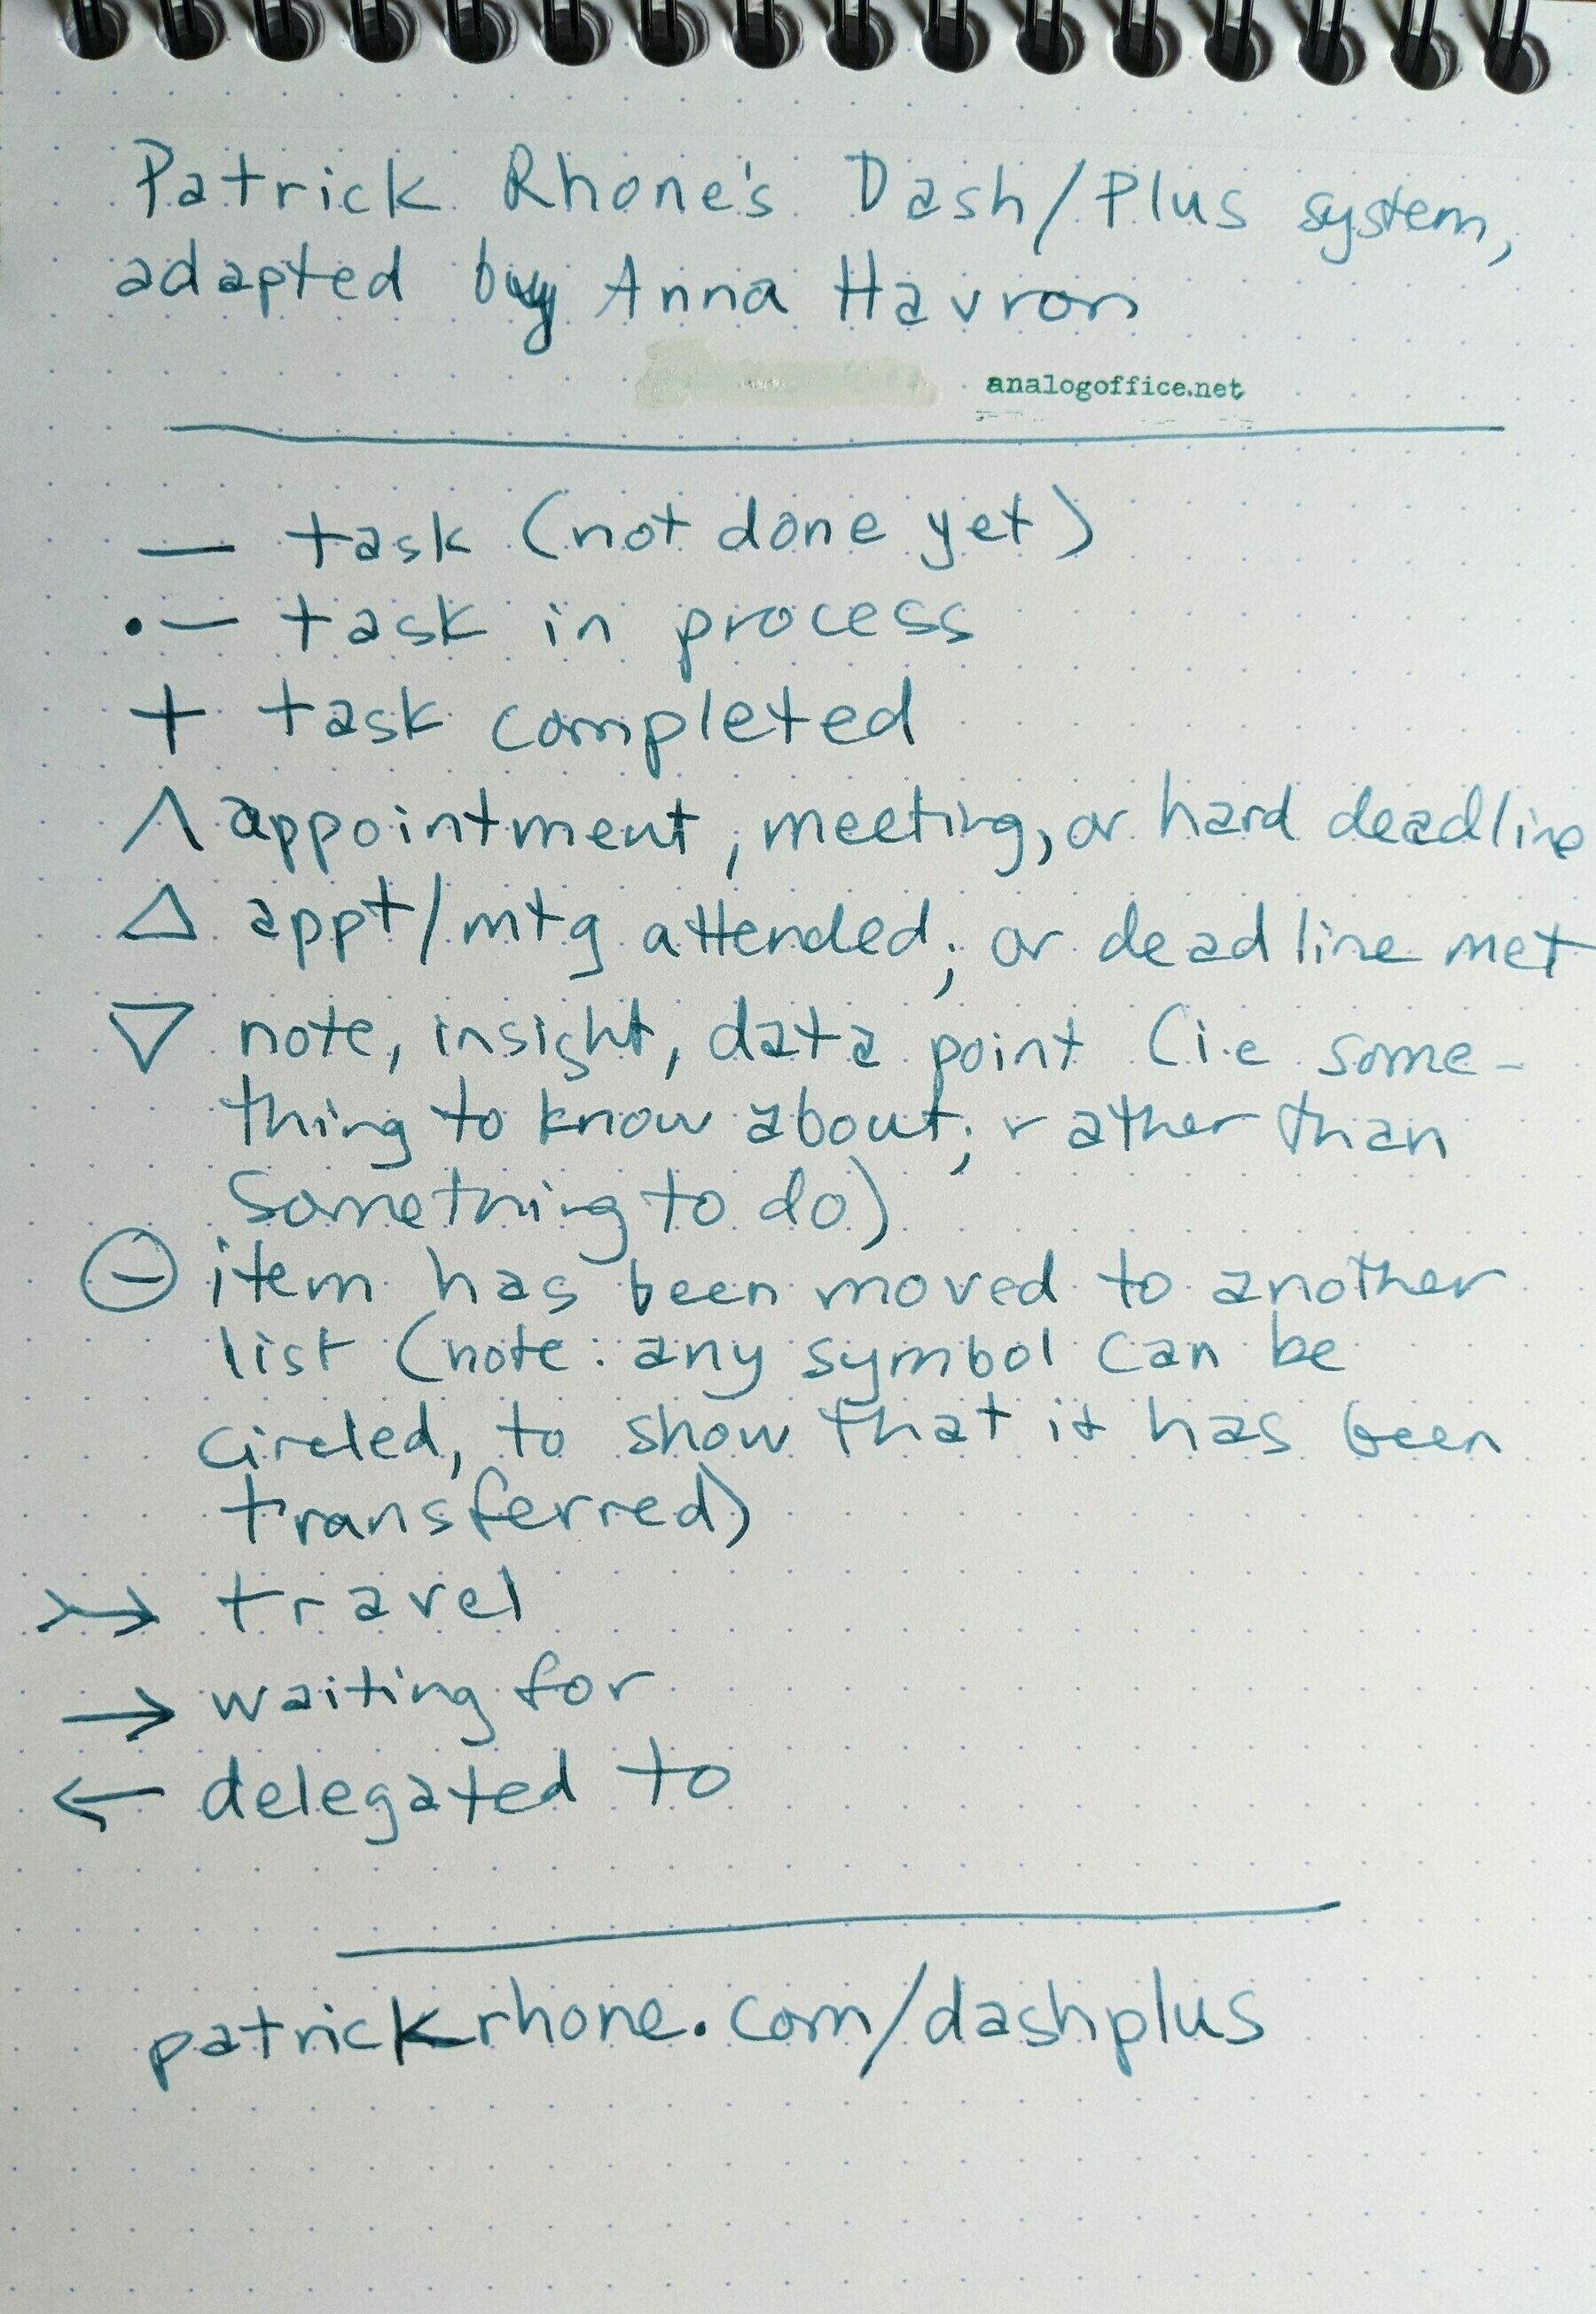 handwritten sheet of paper with symbols for tasks that are done or undone, deadlines met and unmet, and status categories like waiting for, or delegated to